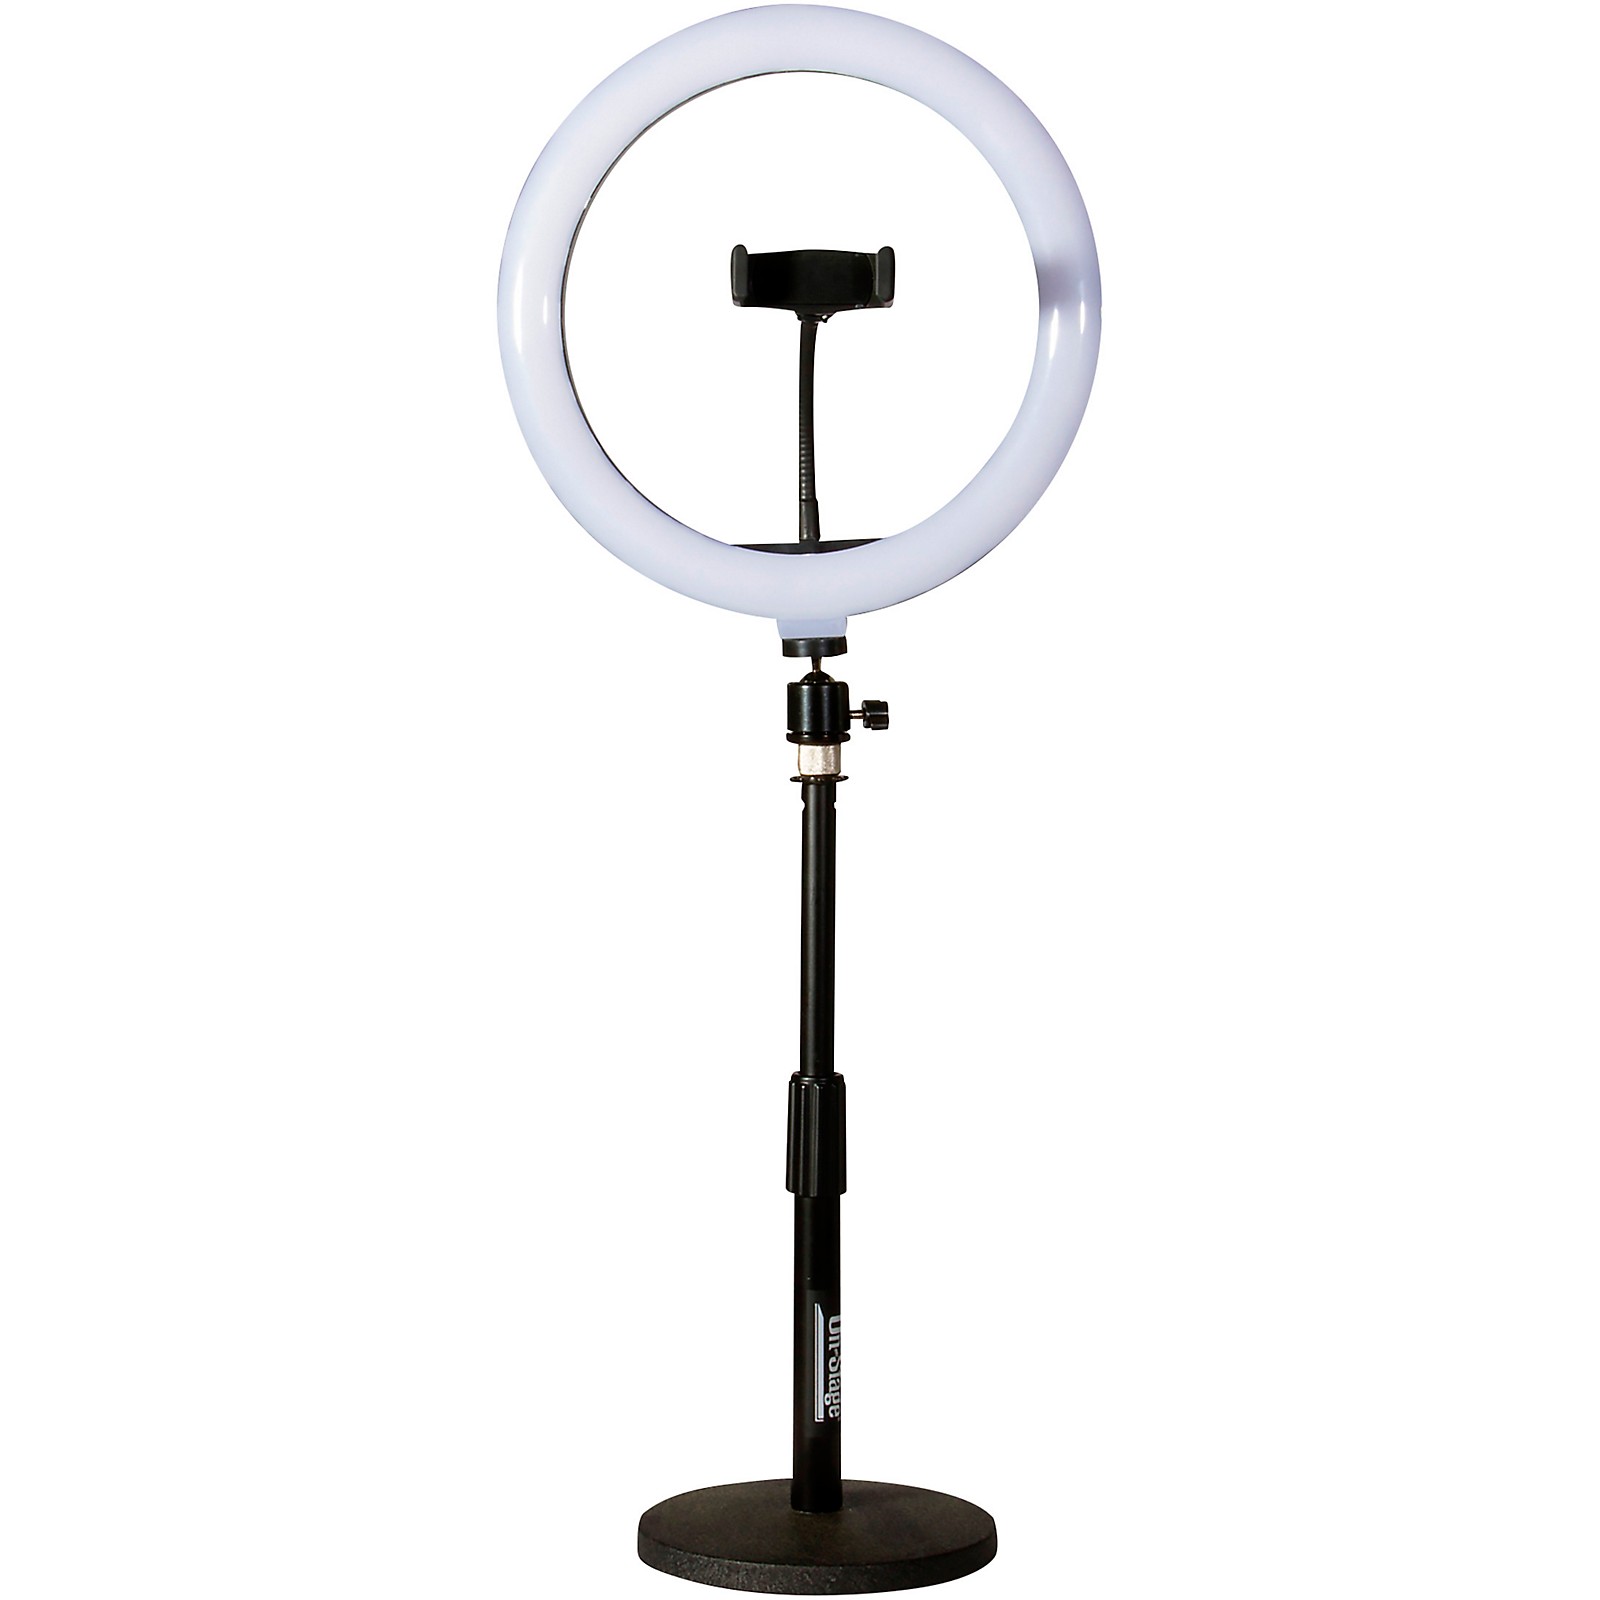 Photography 4.7/6.2 inch Dimmable Vlogging Selfie Ring Light with Cold Shoe  Video Light Kit LED 4.7INCH (12CM) - Walmart.com